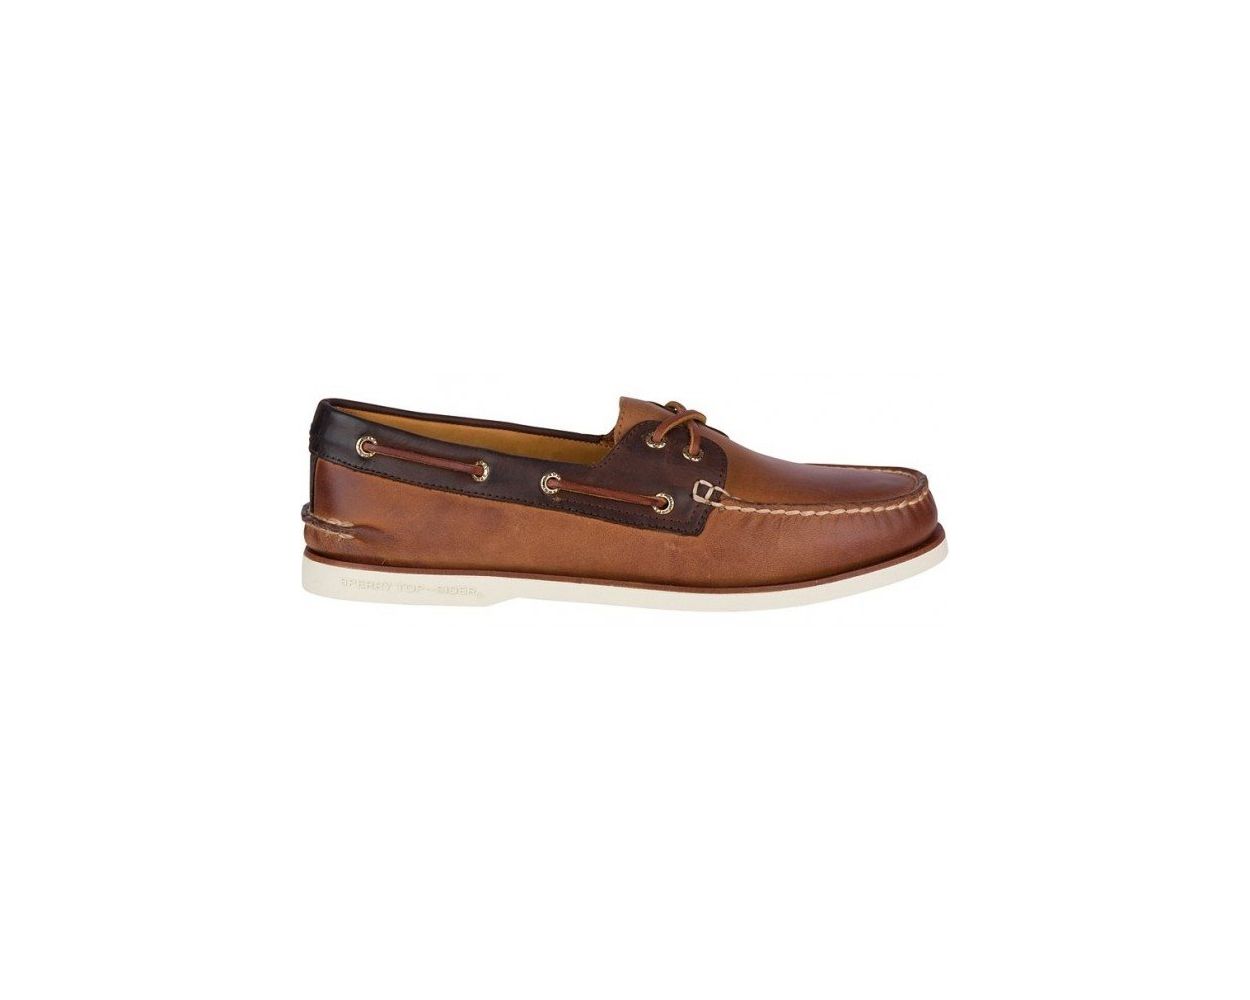 Mens Shoes Slip-on shoes Boat and deck shoes Sperry Top-Sider Leather gold Cup Original Boat Shoe Tan in Brown for Men 